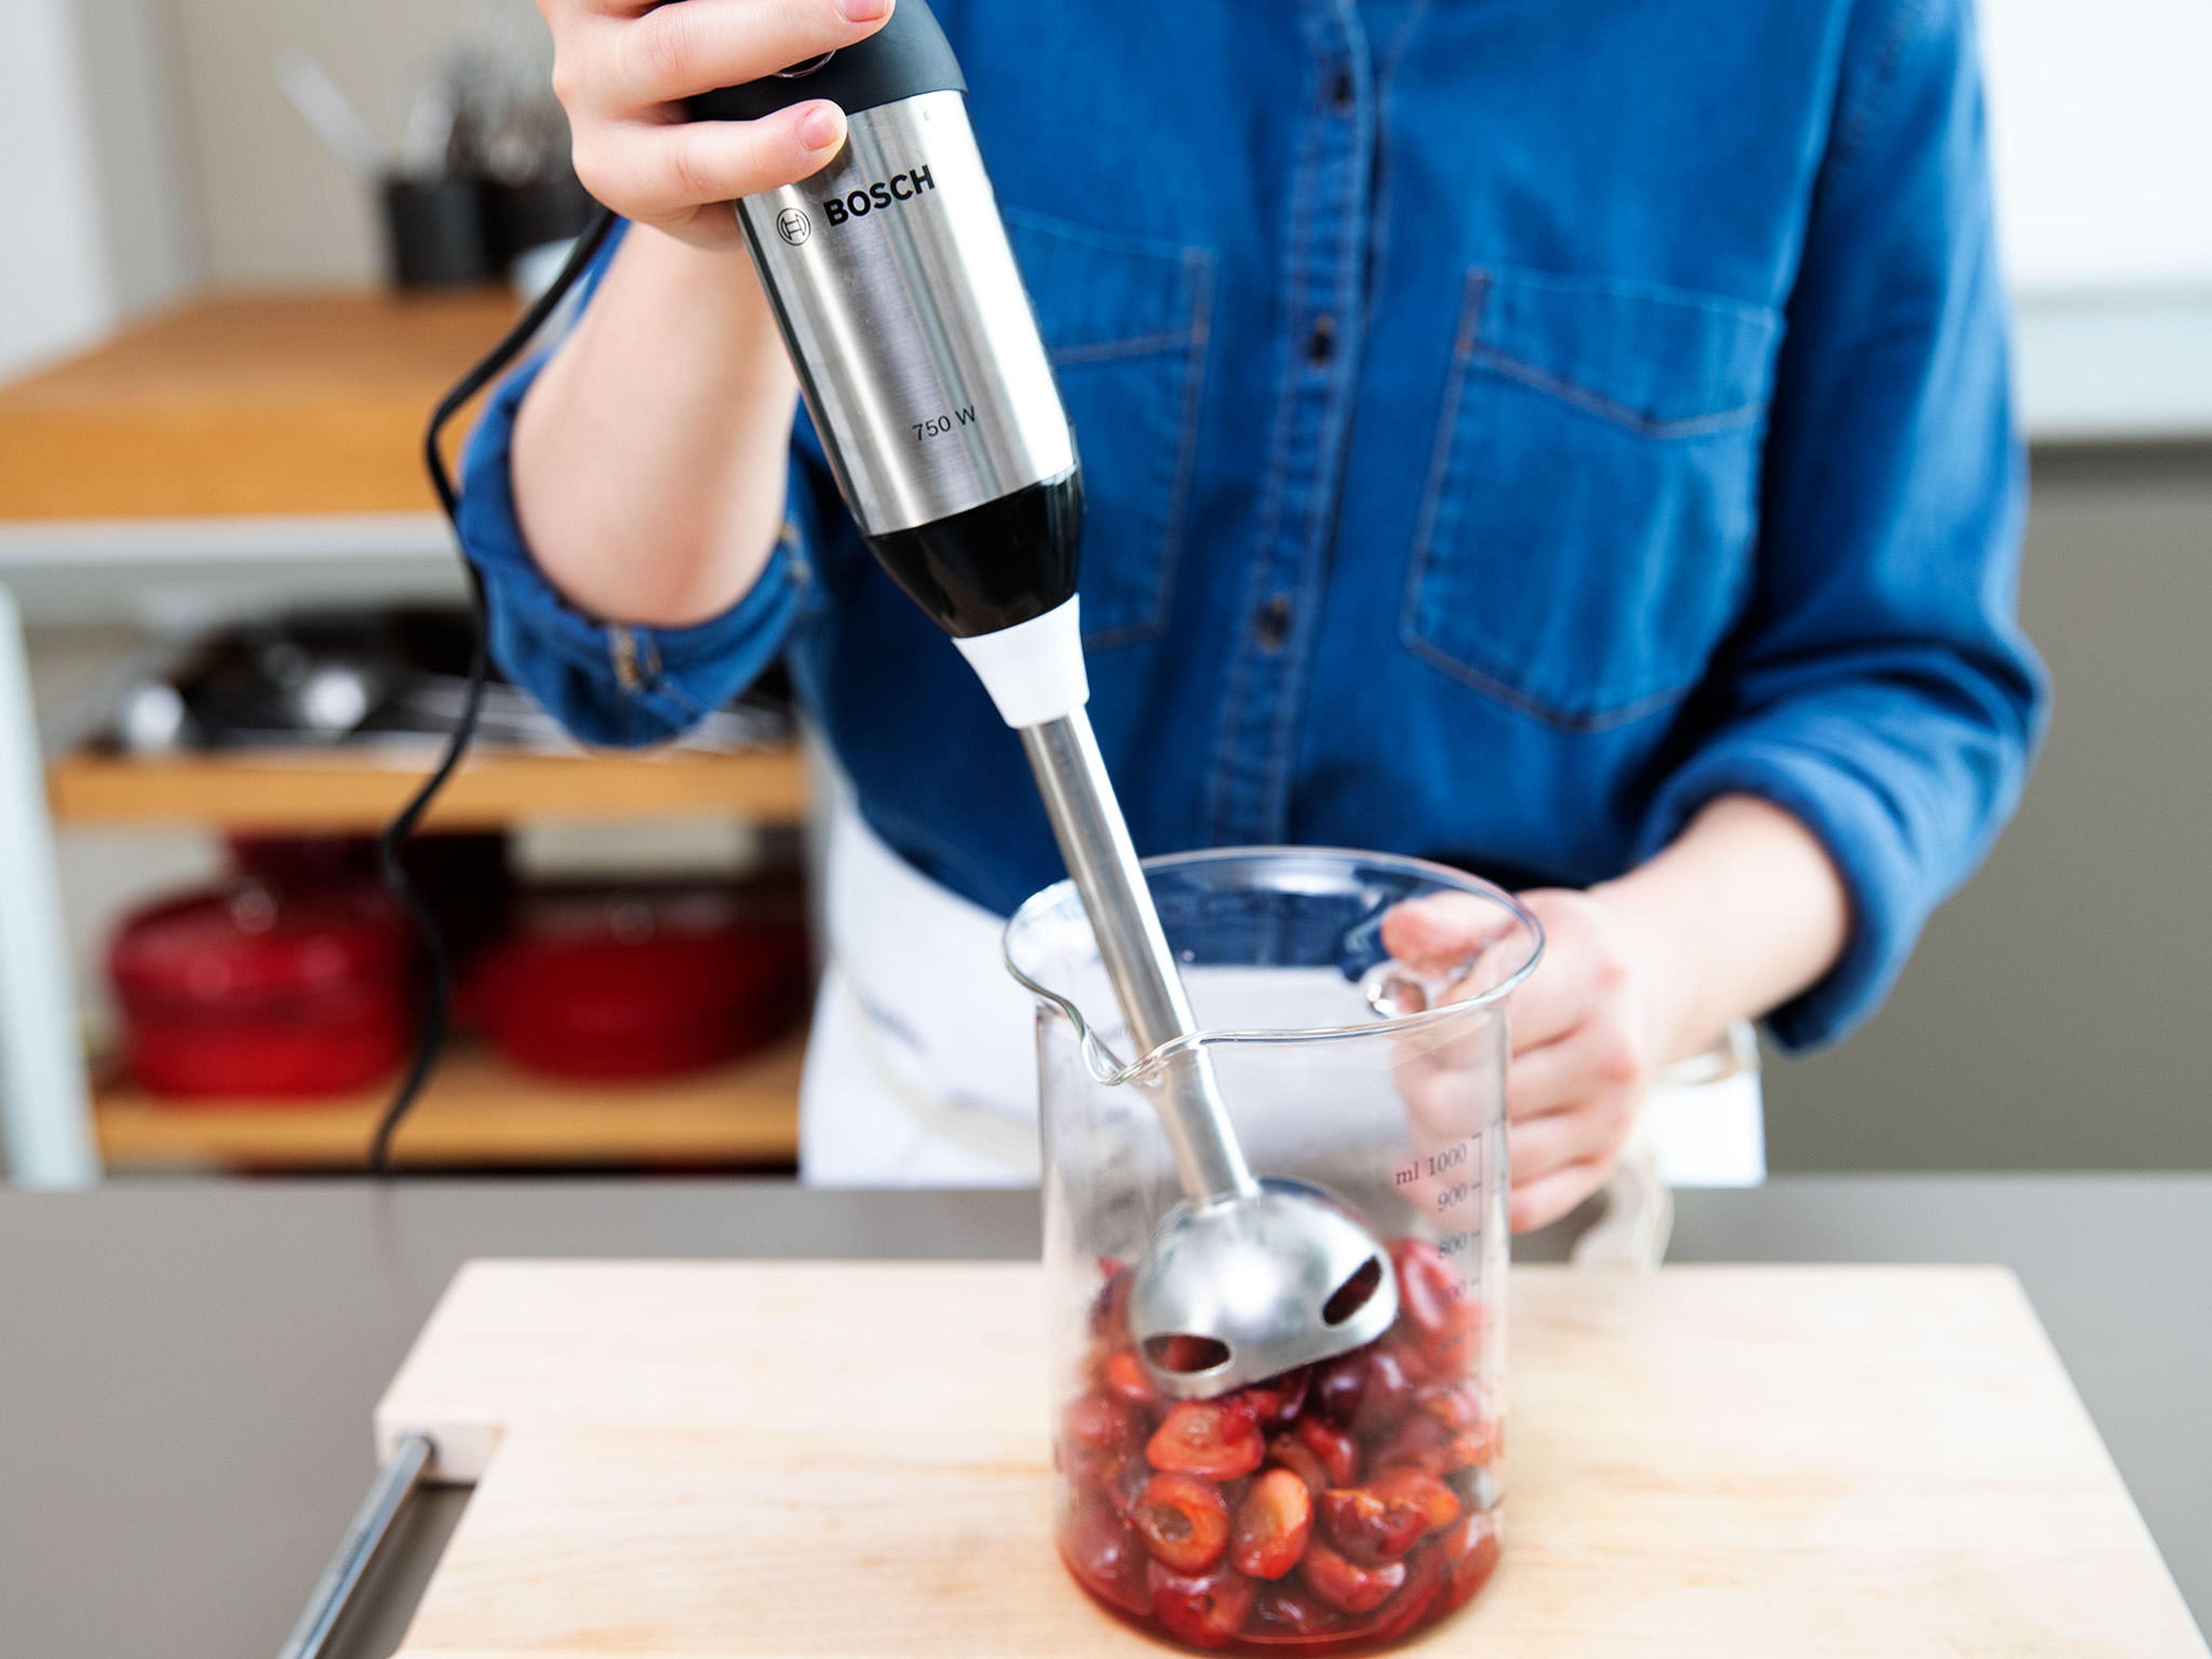 Transfer cherries from the pot into a liquid measuring cup and blend. Add agar-agar and stir to combine. Transfer cherry puree back to the pot and let boil for approx. 2 min. more.